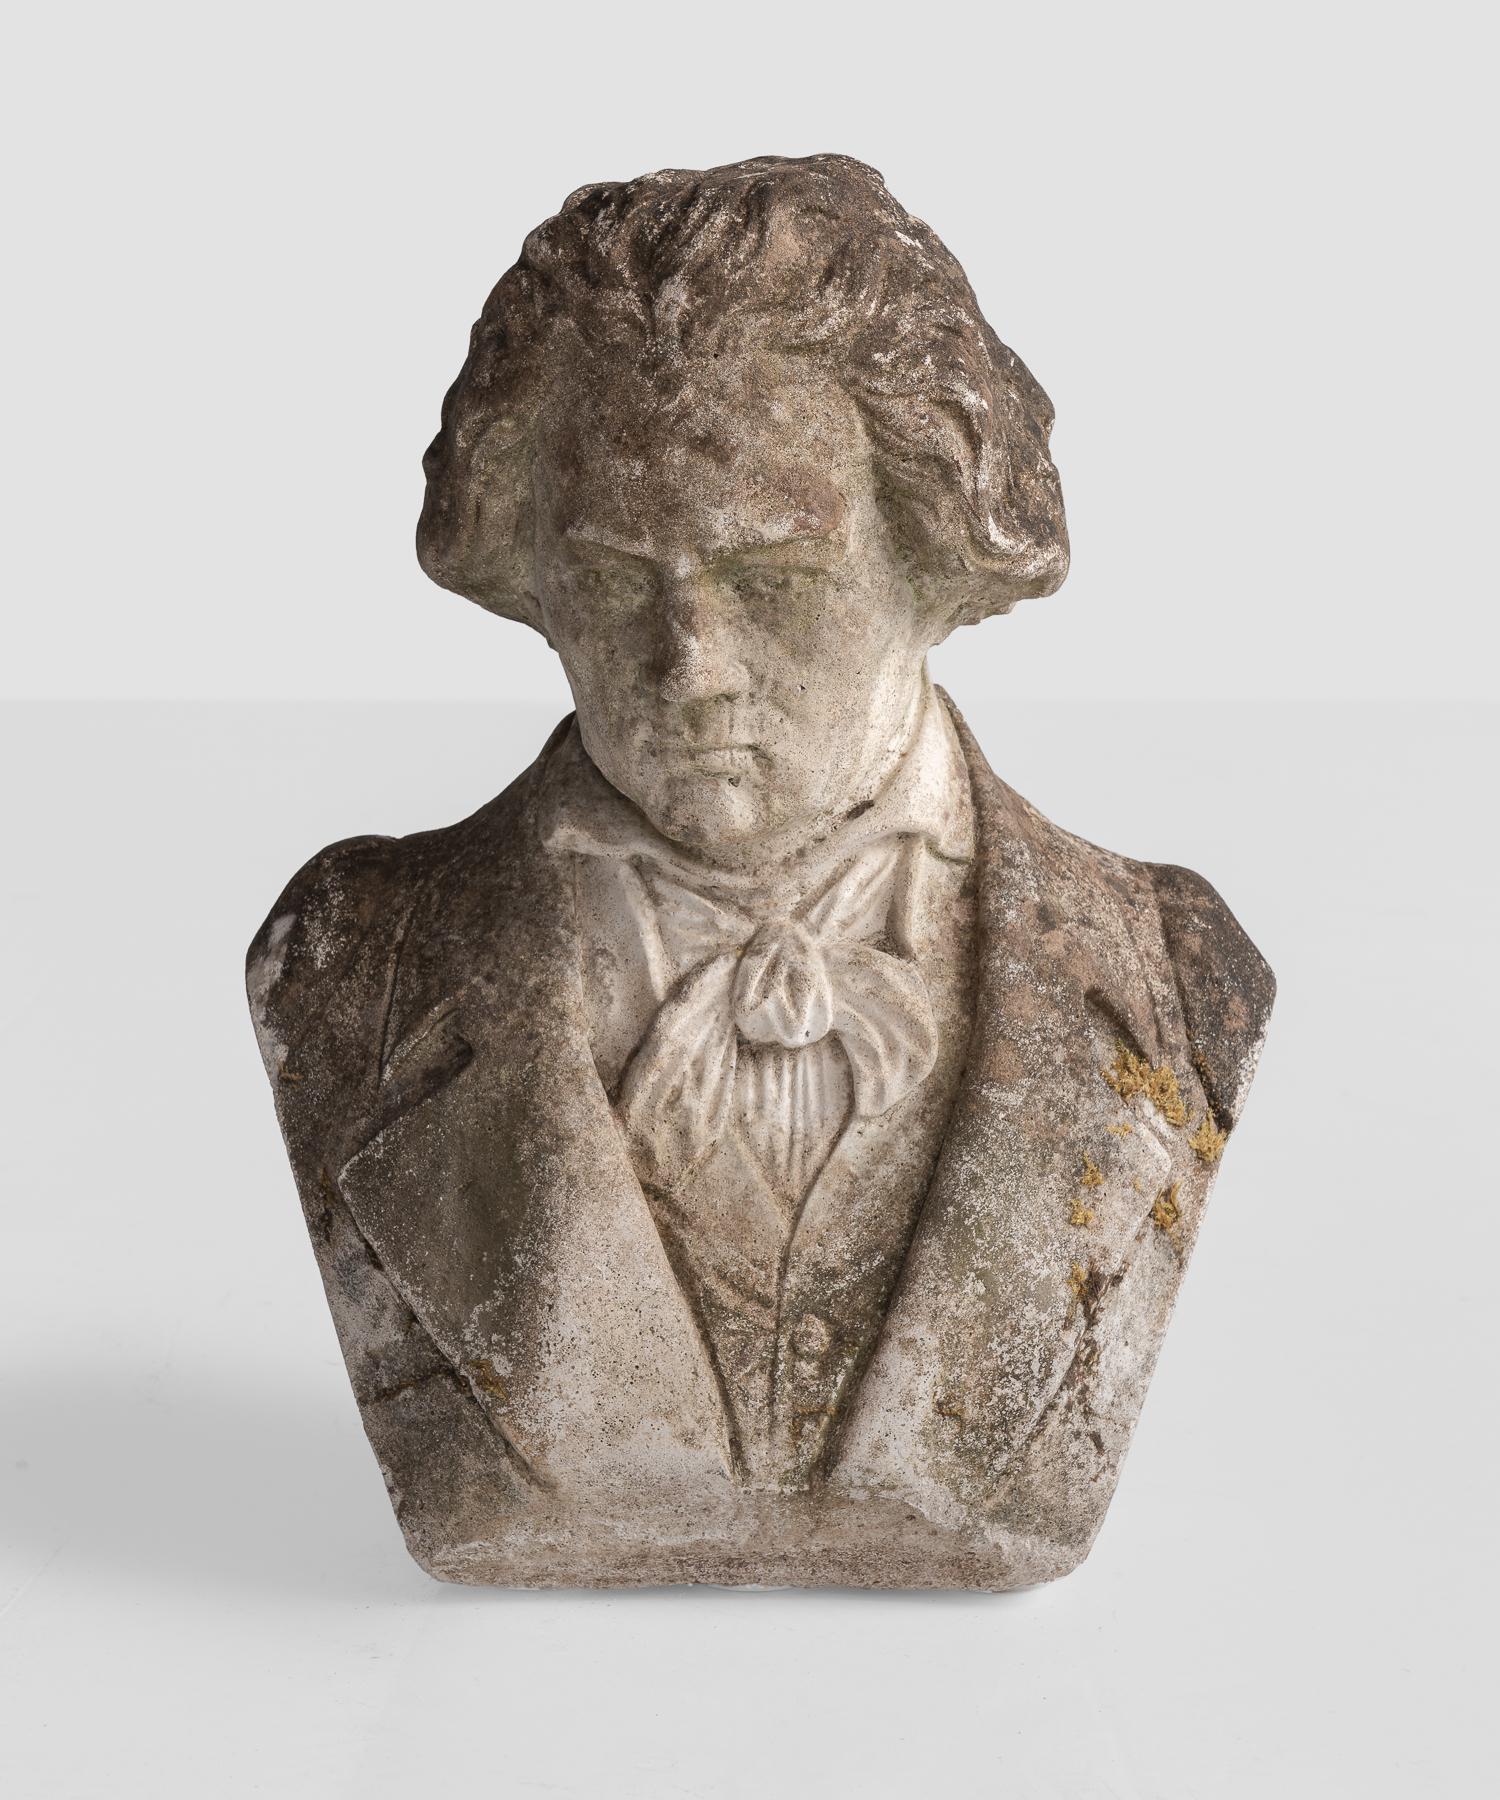 English Reconstituted Stone Bust of Beethoven, circa 1960